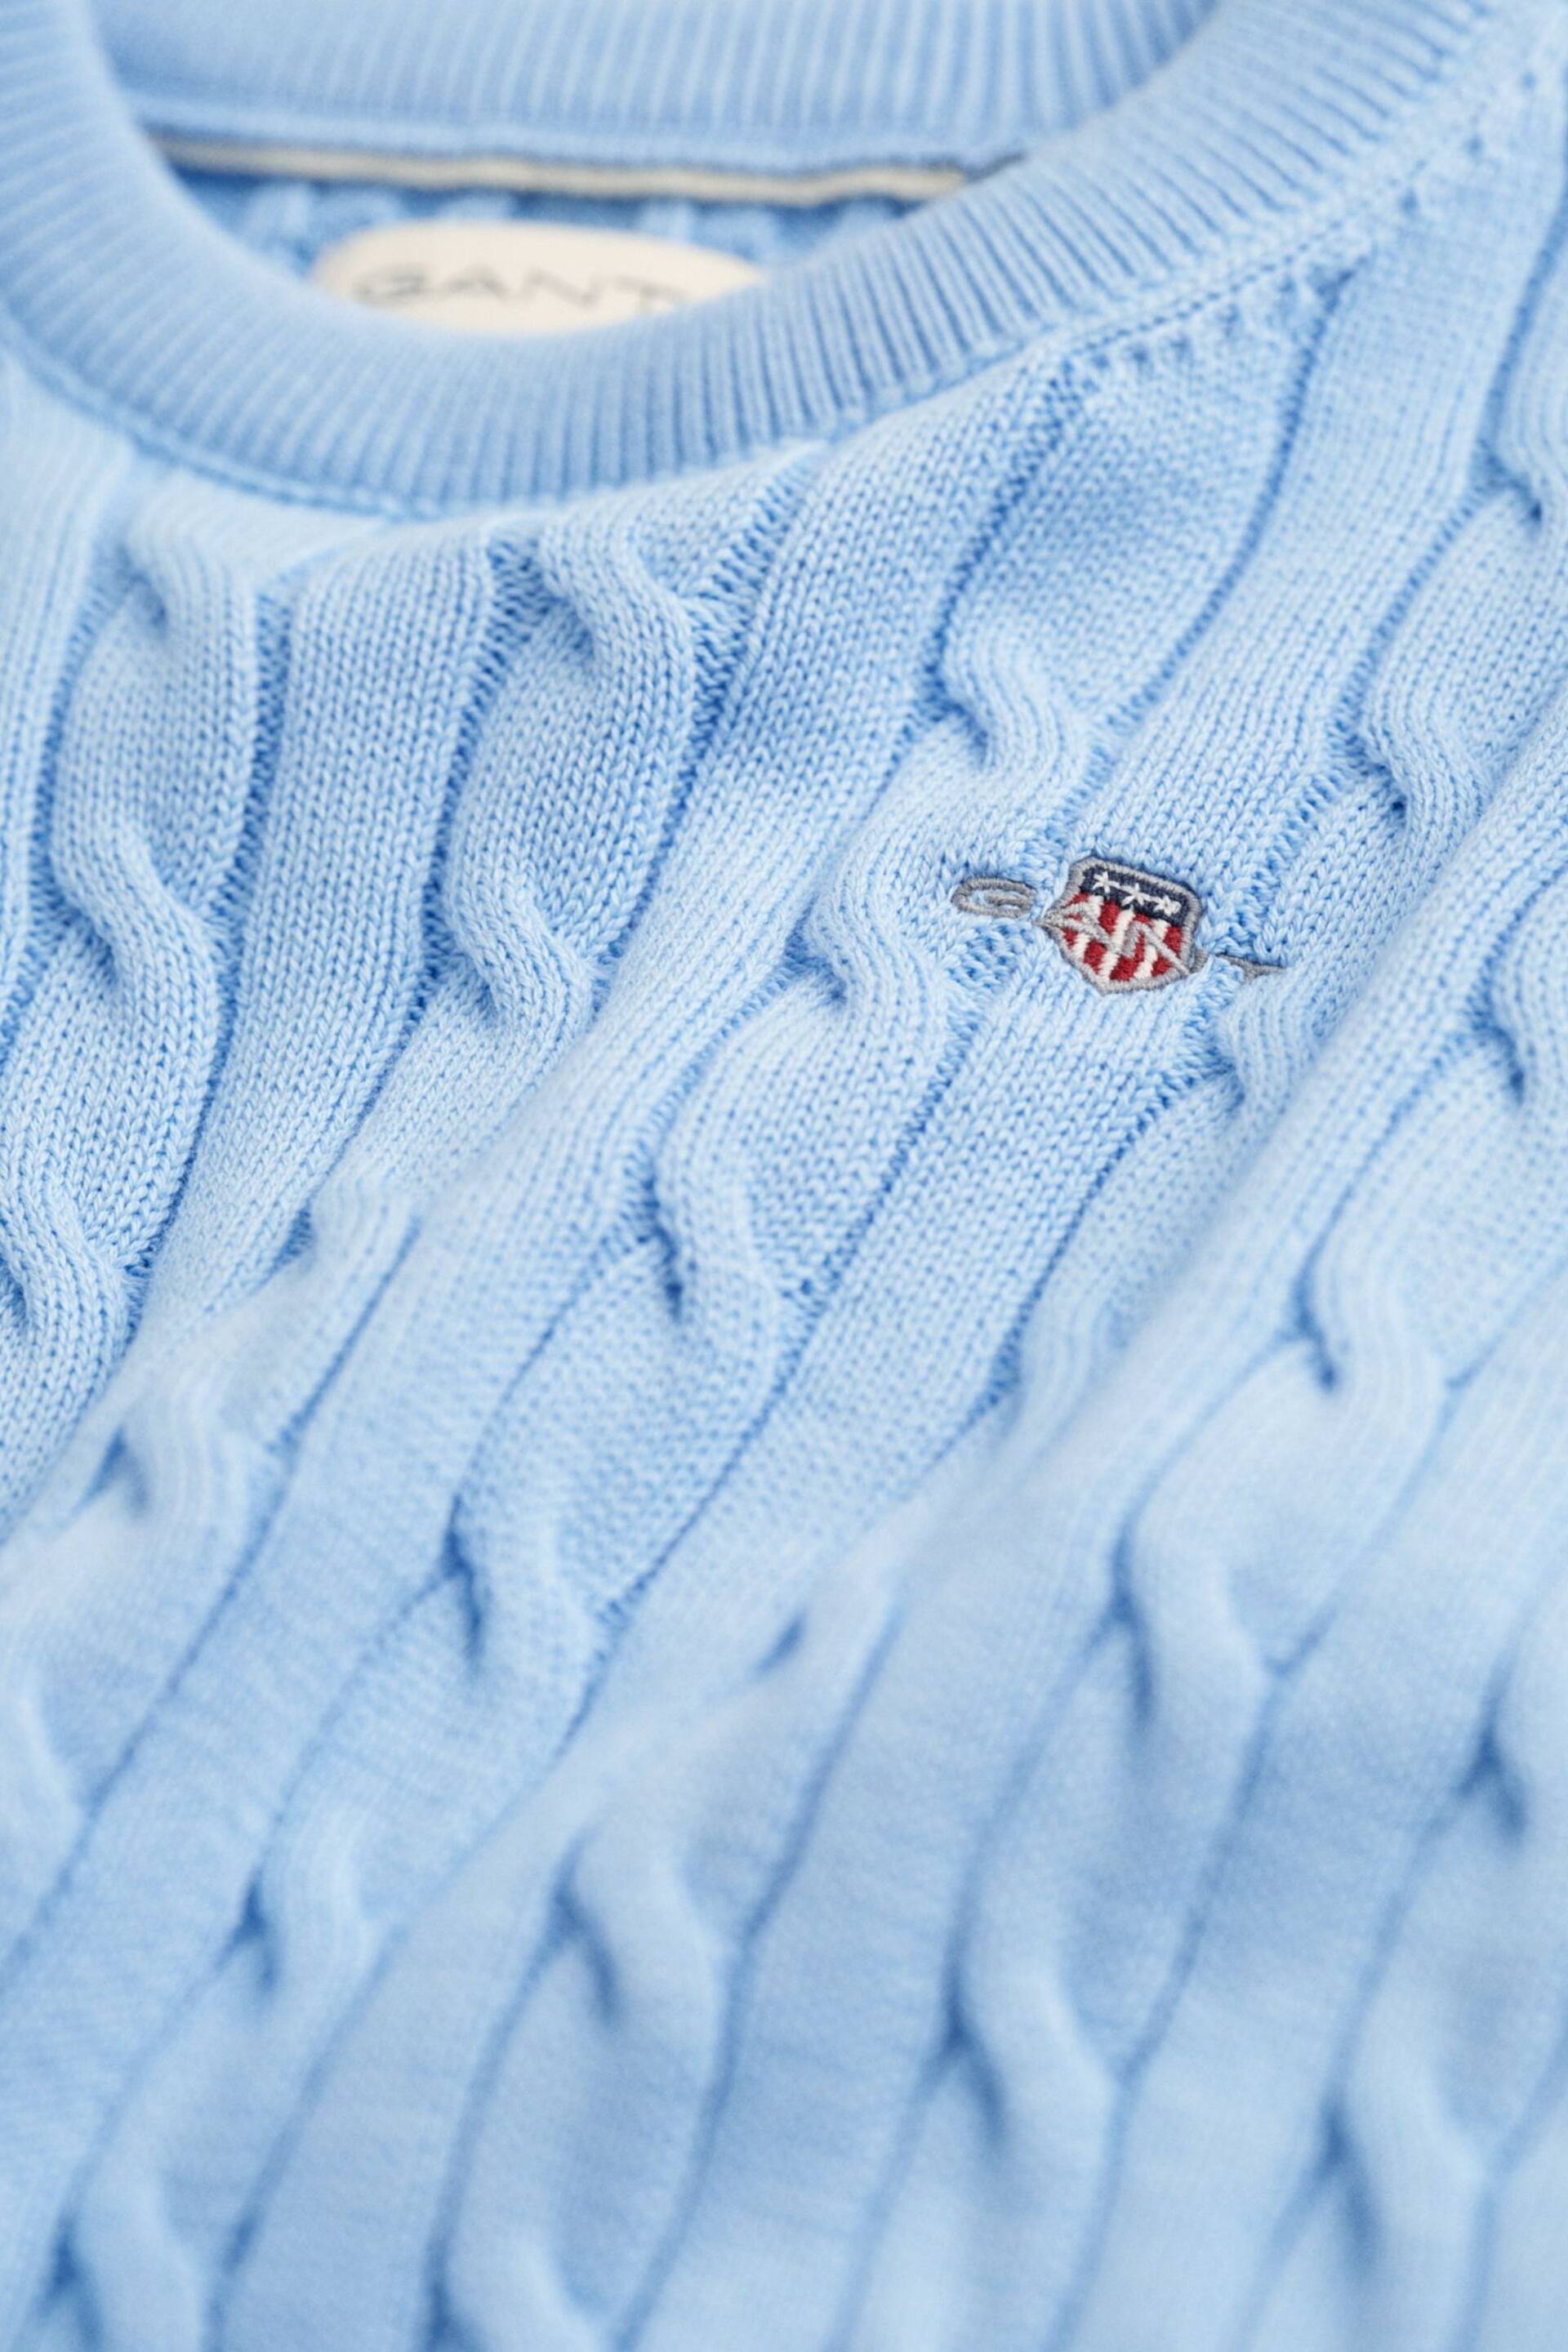 GANT Kids Shield Cotton Cable Knit Crew Neck Sweater - Image 6 of 6